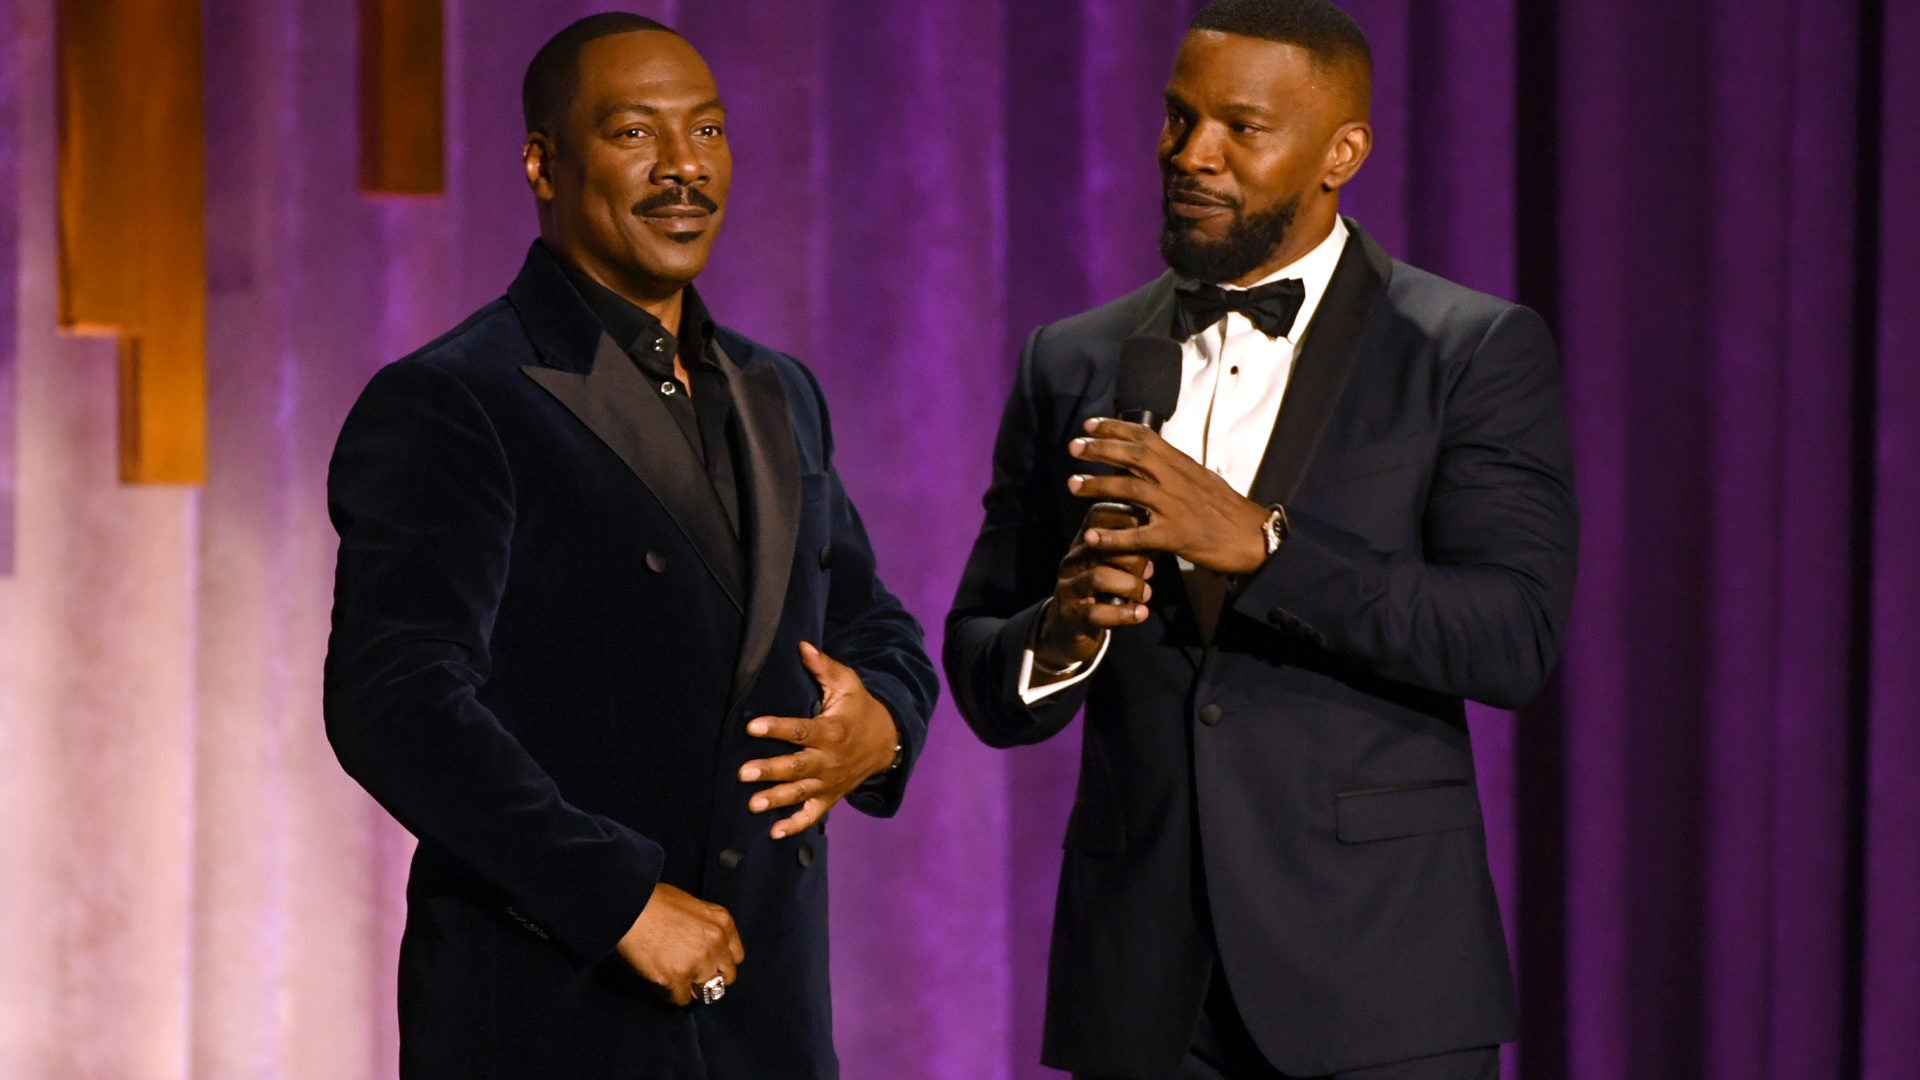 Black Hollywood Was Out In Full Force At The Academy’s Honorary Governors Awards